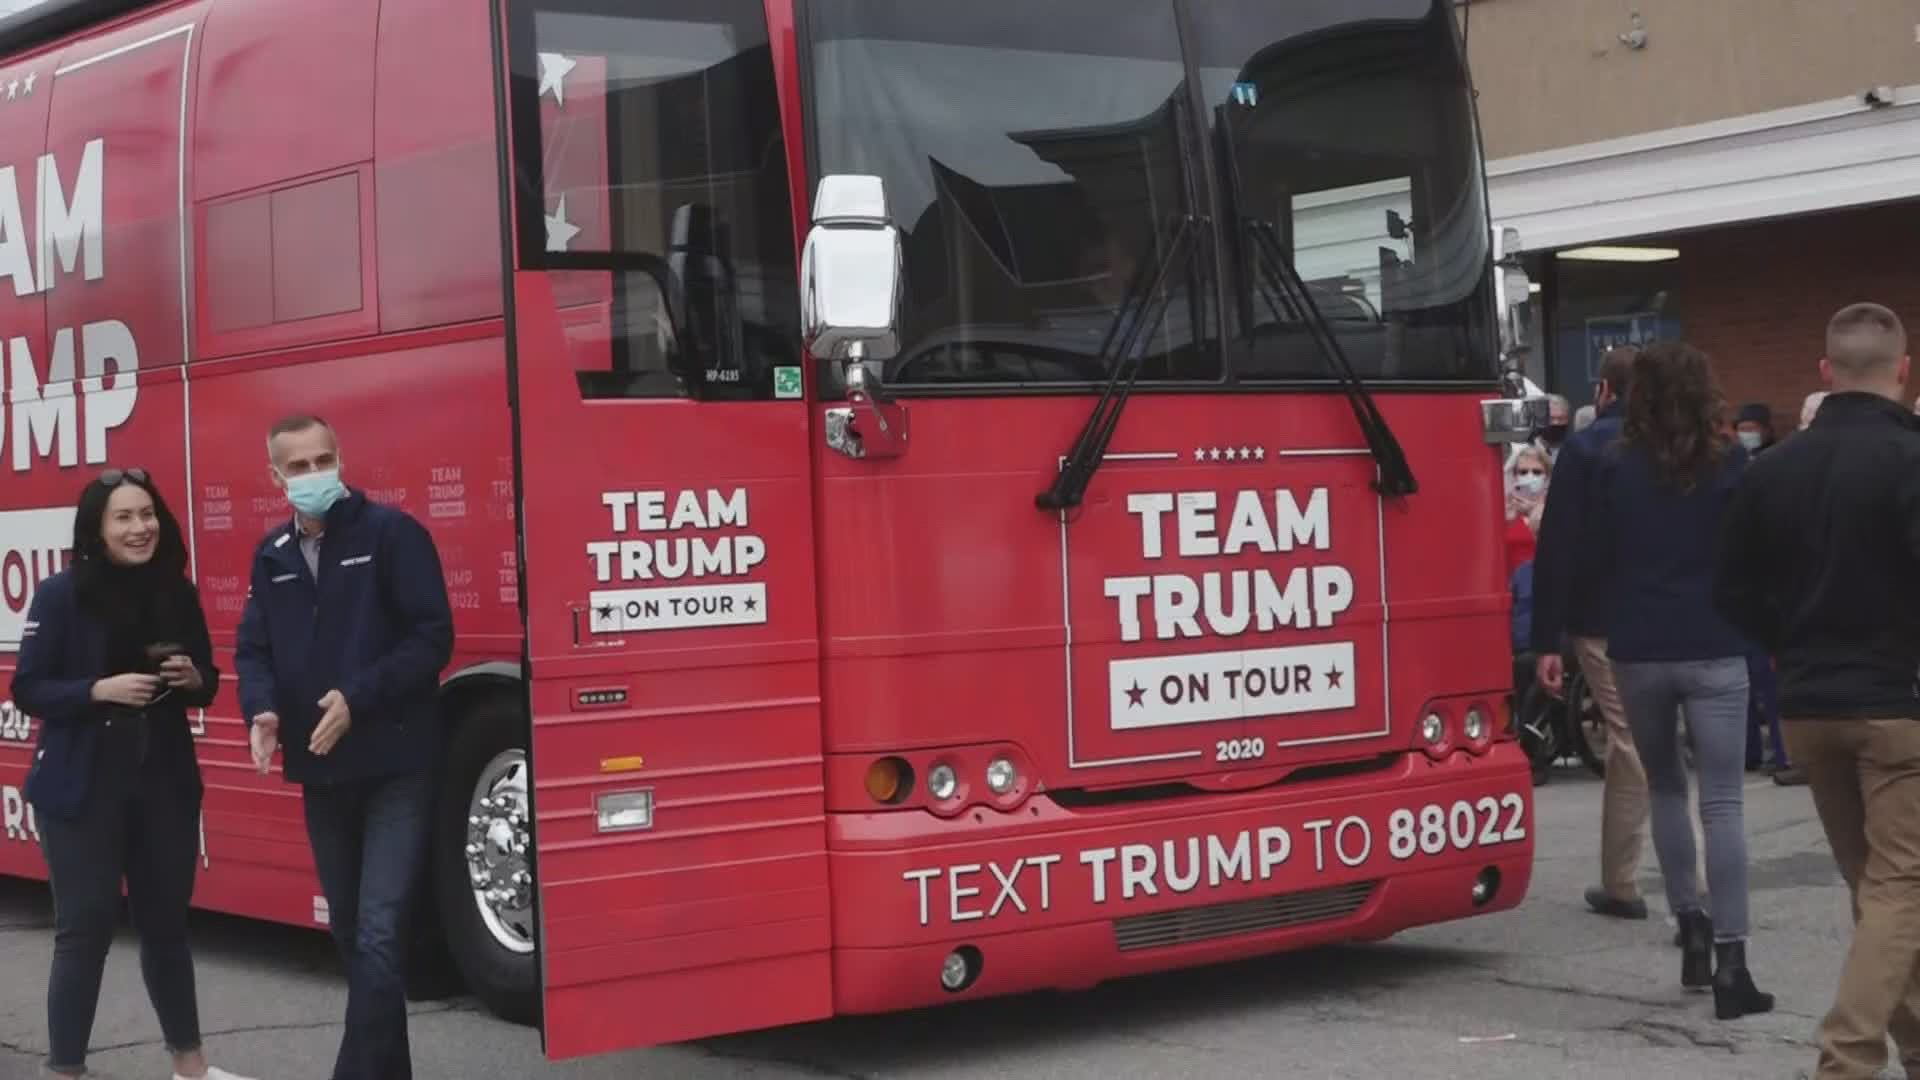 Wednesday, the Trump campaign held multiple 'bus tour' events, starting in Bangor.